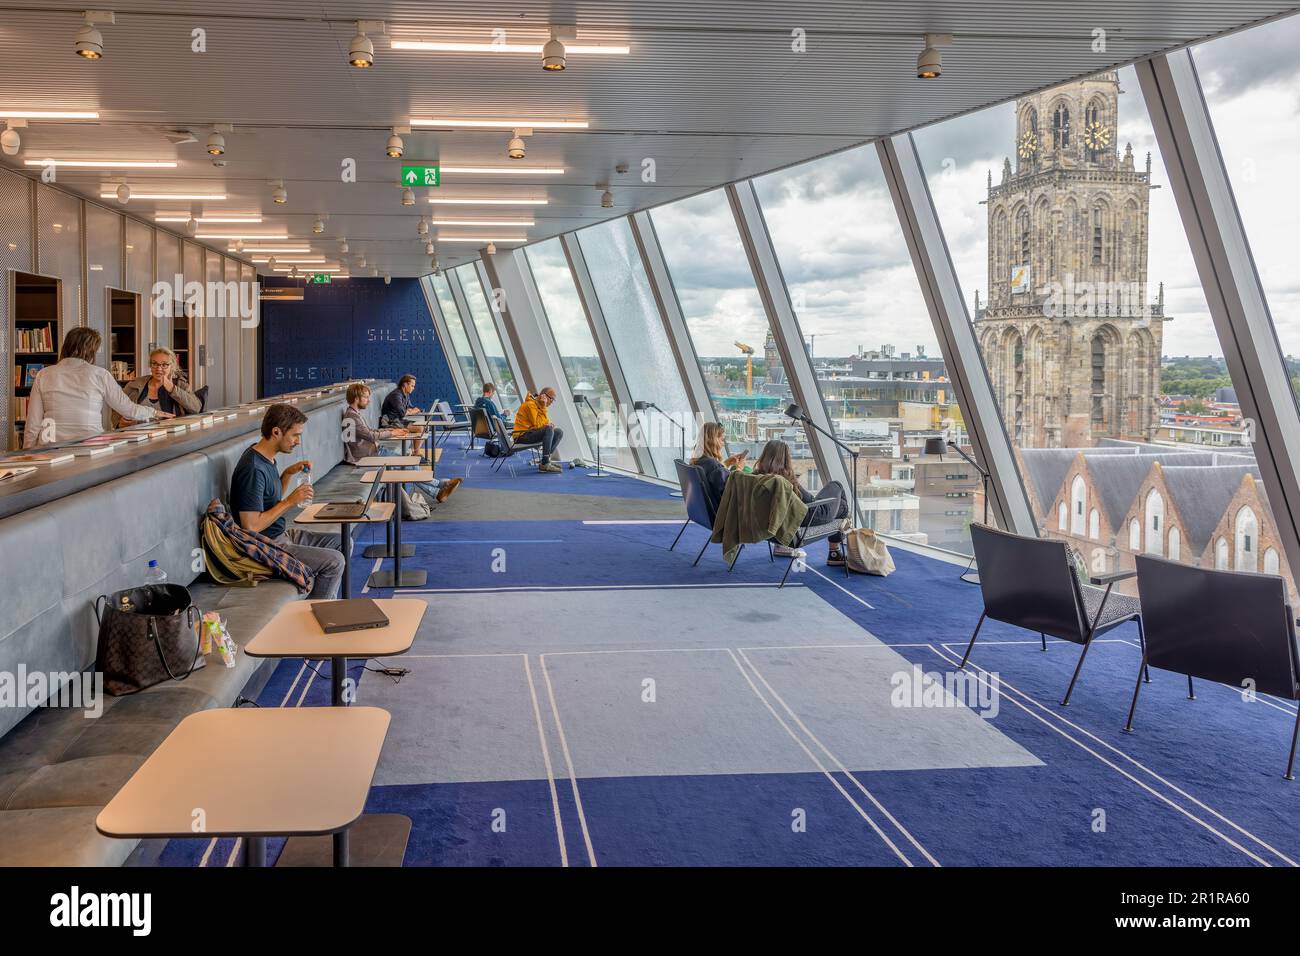 Groningen, The Netherlands - July 7, 2022: Interior modern Forum building medieval city Groningen with library and view at Martini Tower Stock Photo